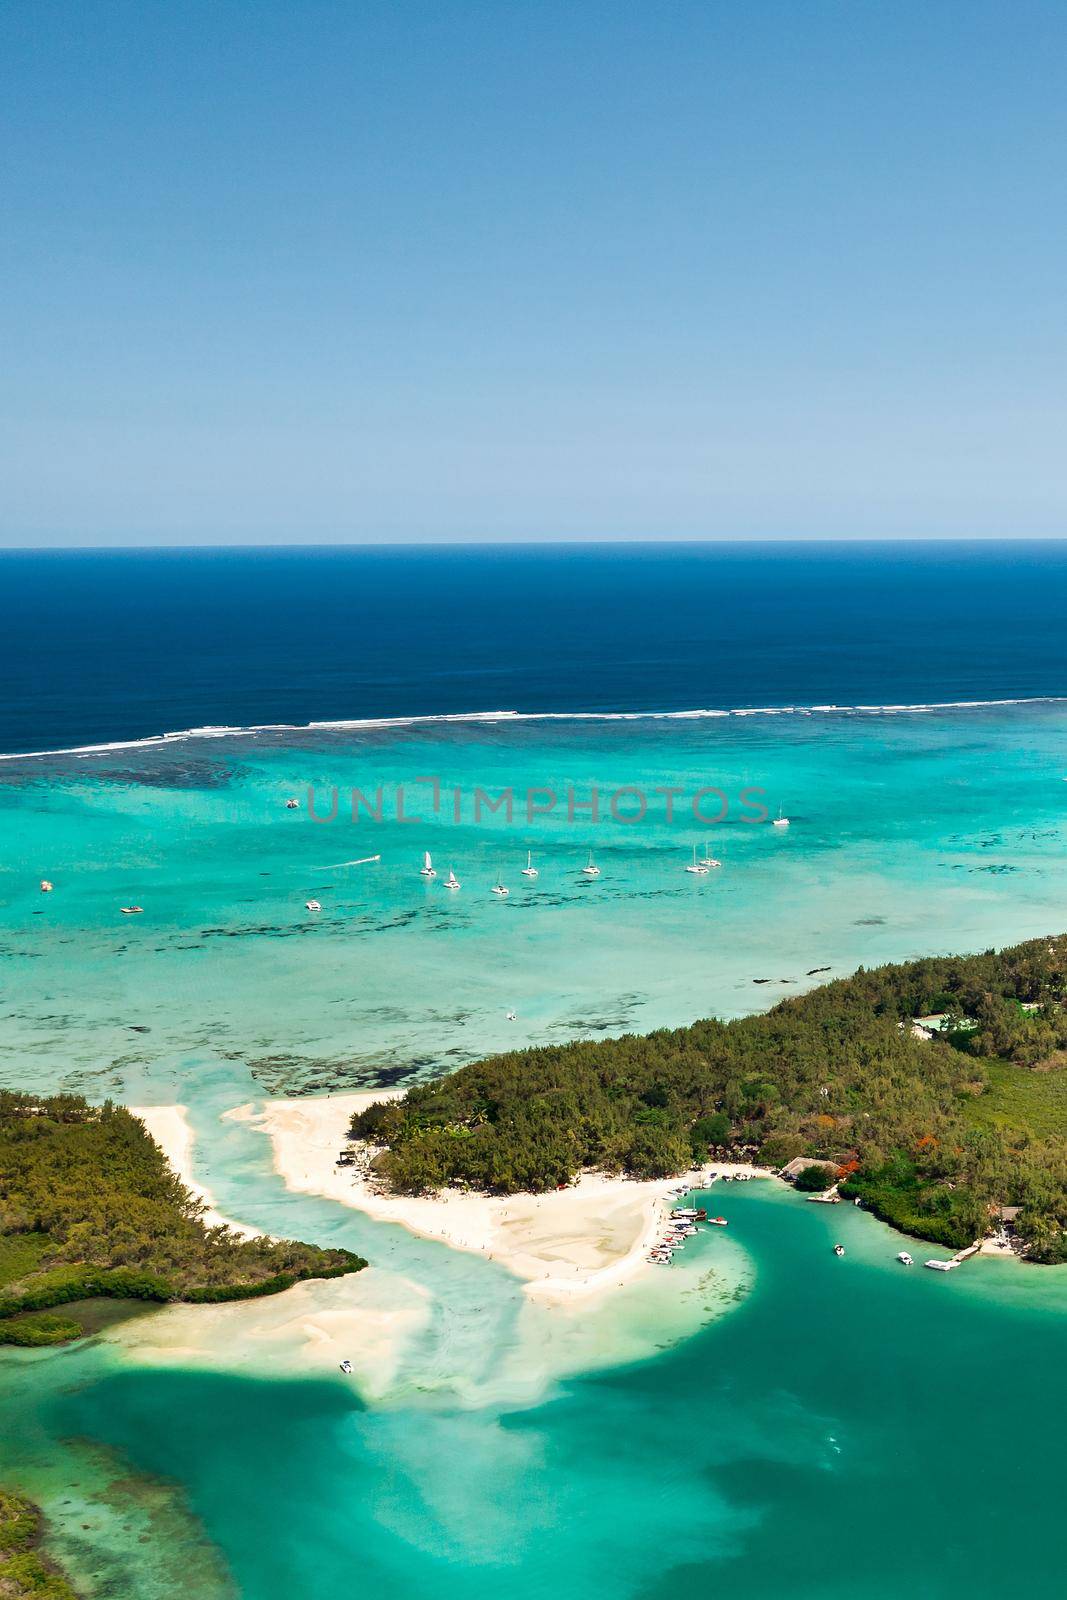 Top view of the lagoon and coral reef of Mauritius in the Indian Ocean.